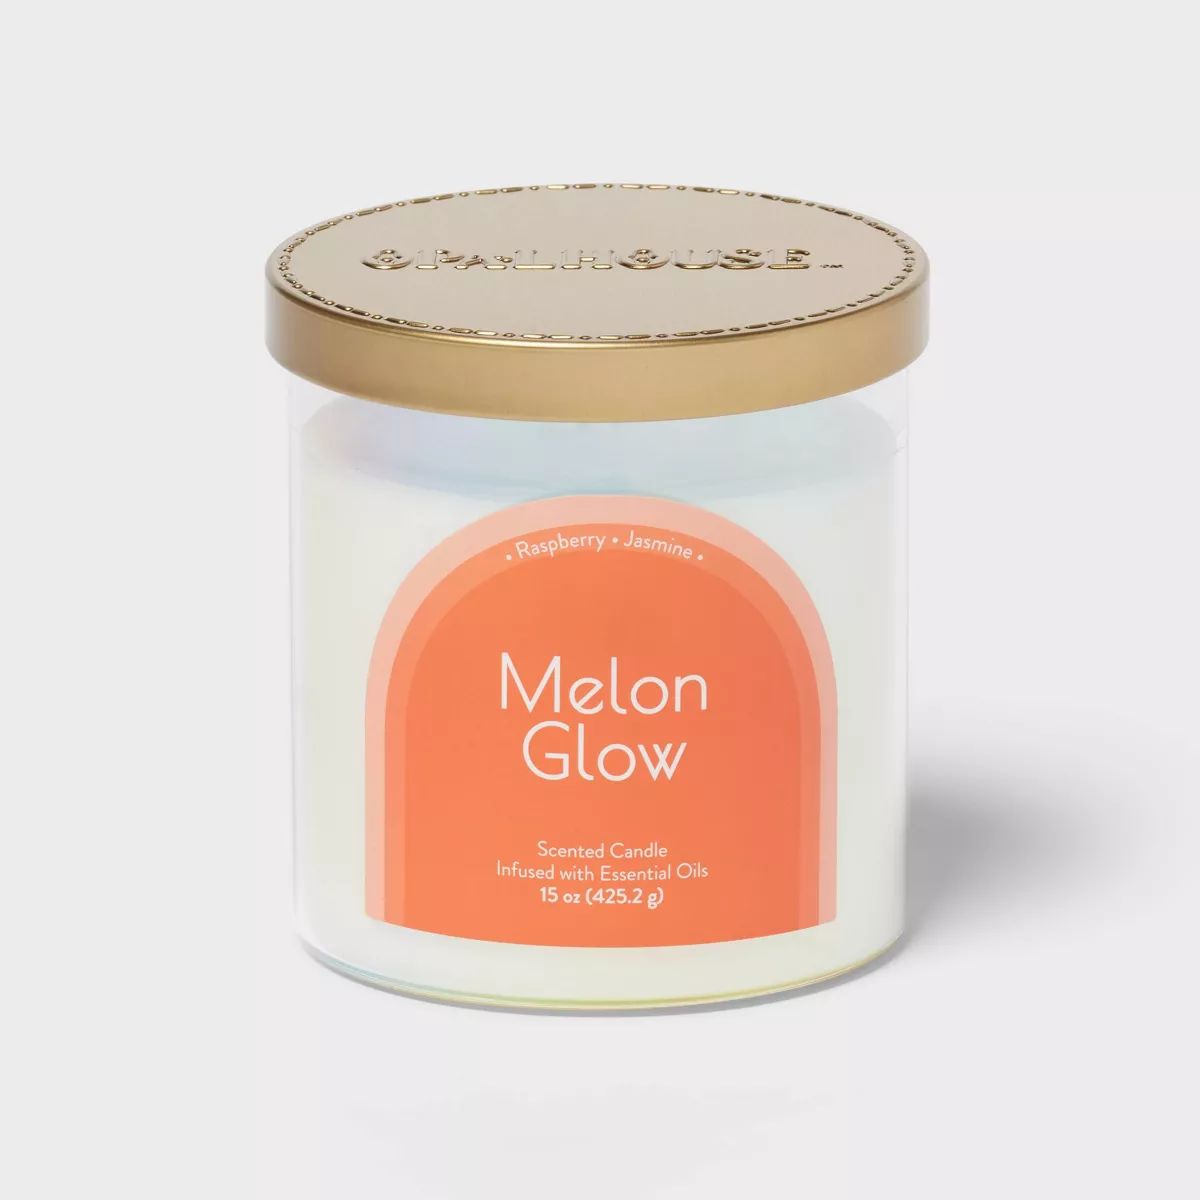 2-Wick Glass Jar 15oz Candle with Iridescent Sleeve Melon Glow - Opalhouse™ | Target